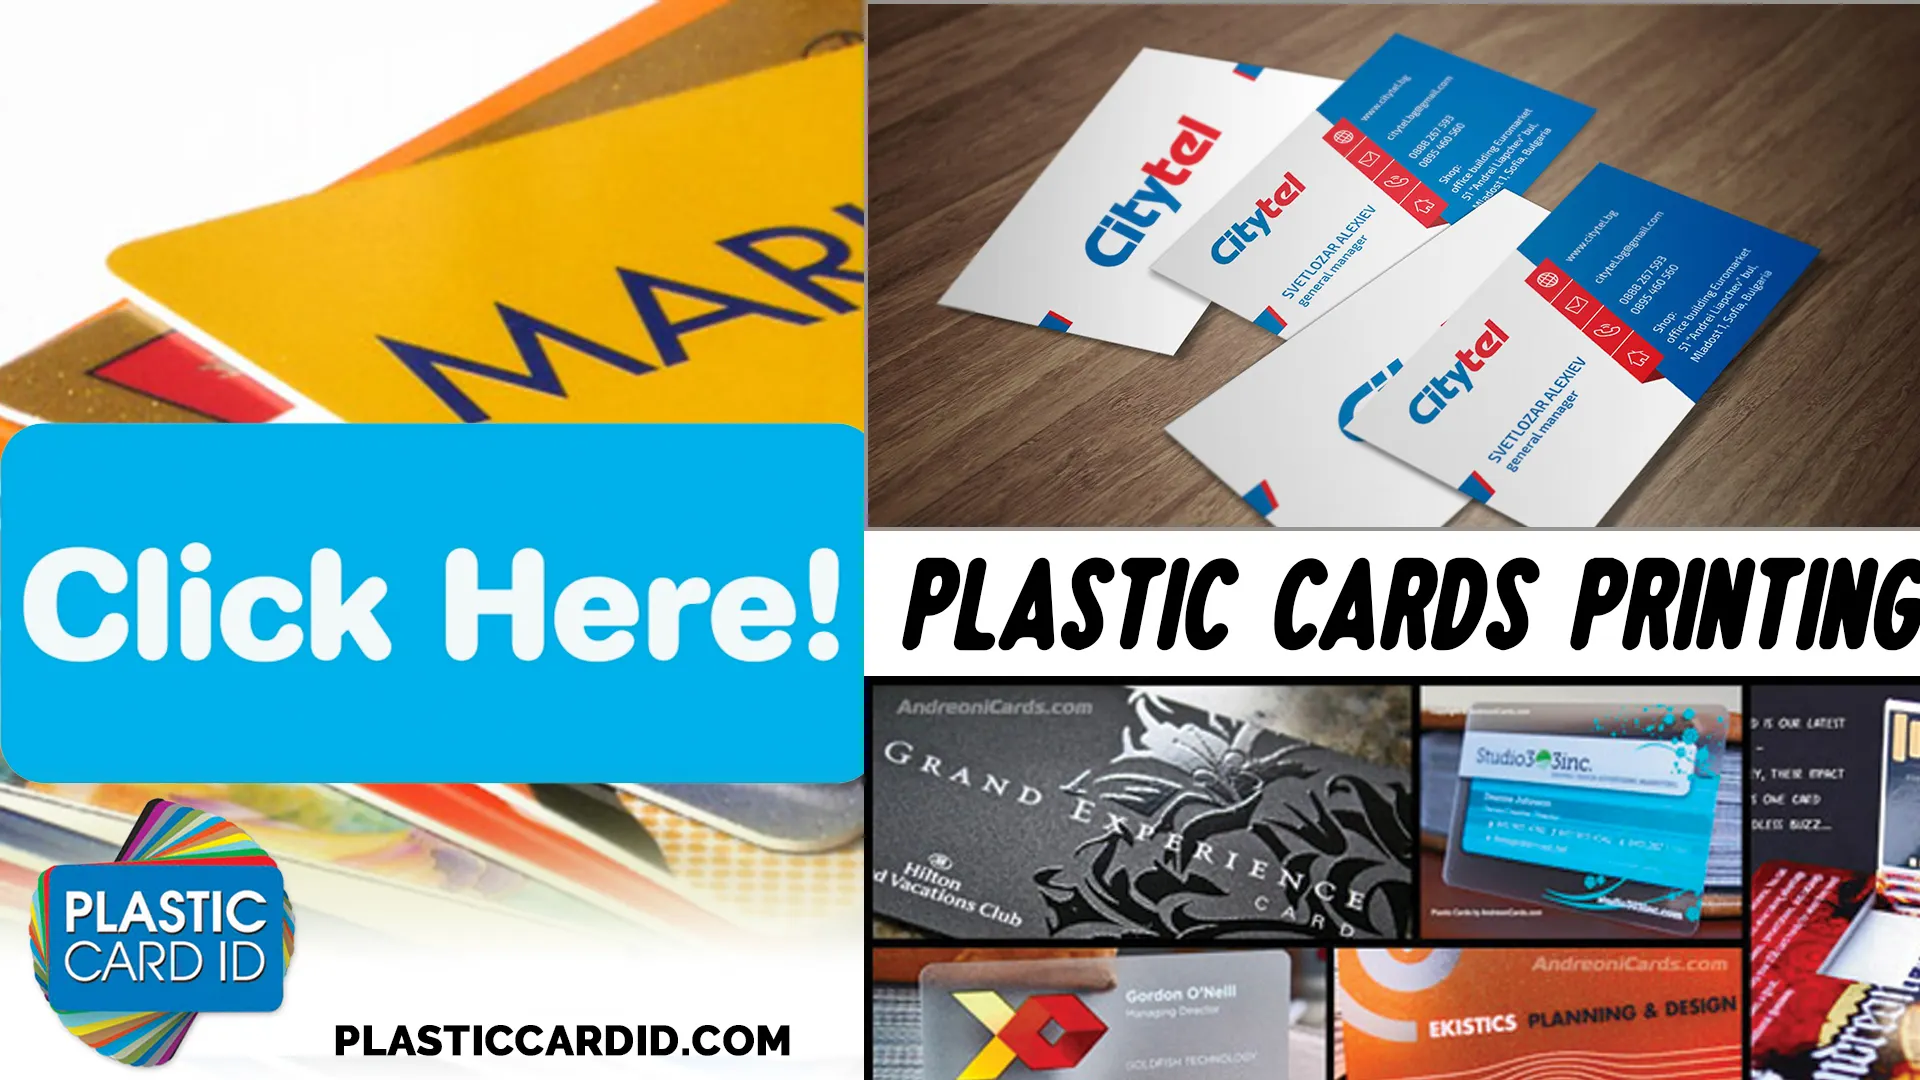 The Versatile Uses of Encoded Plastic Cards